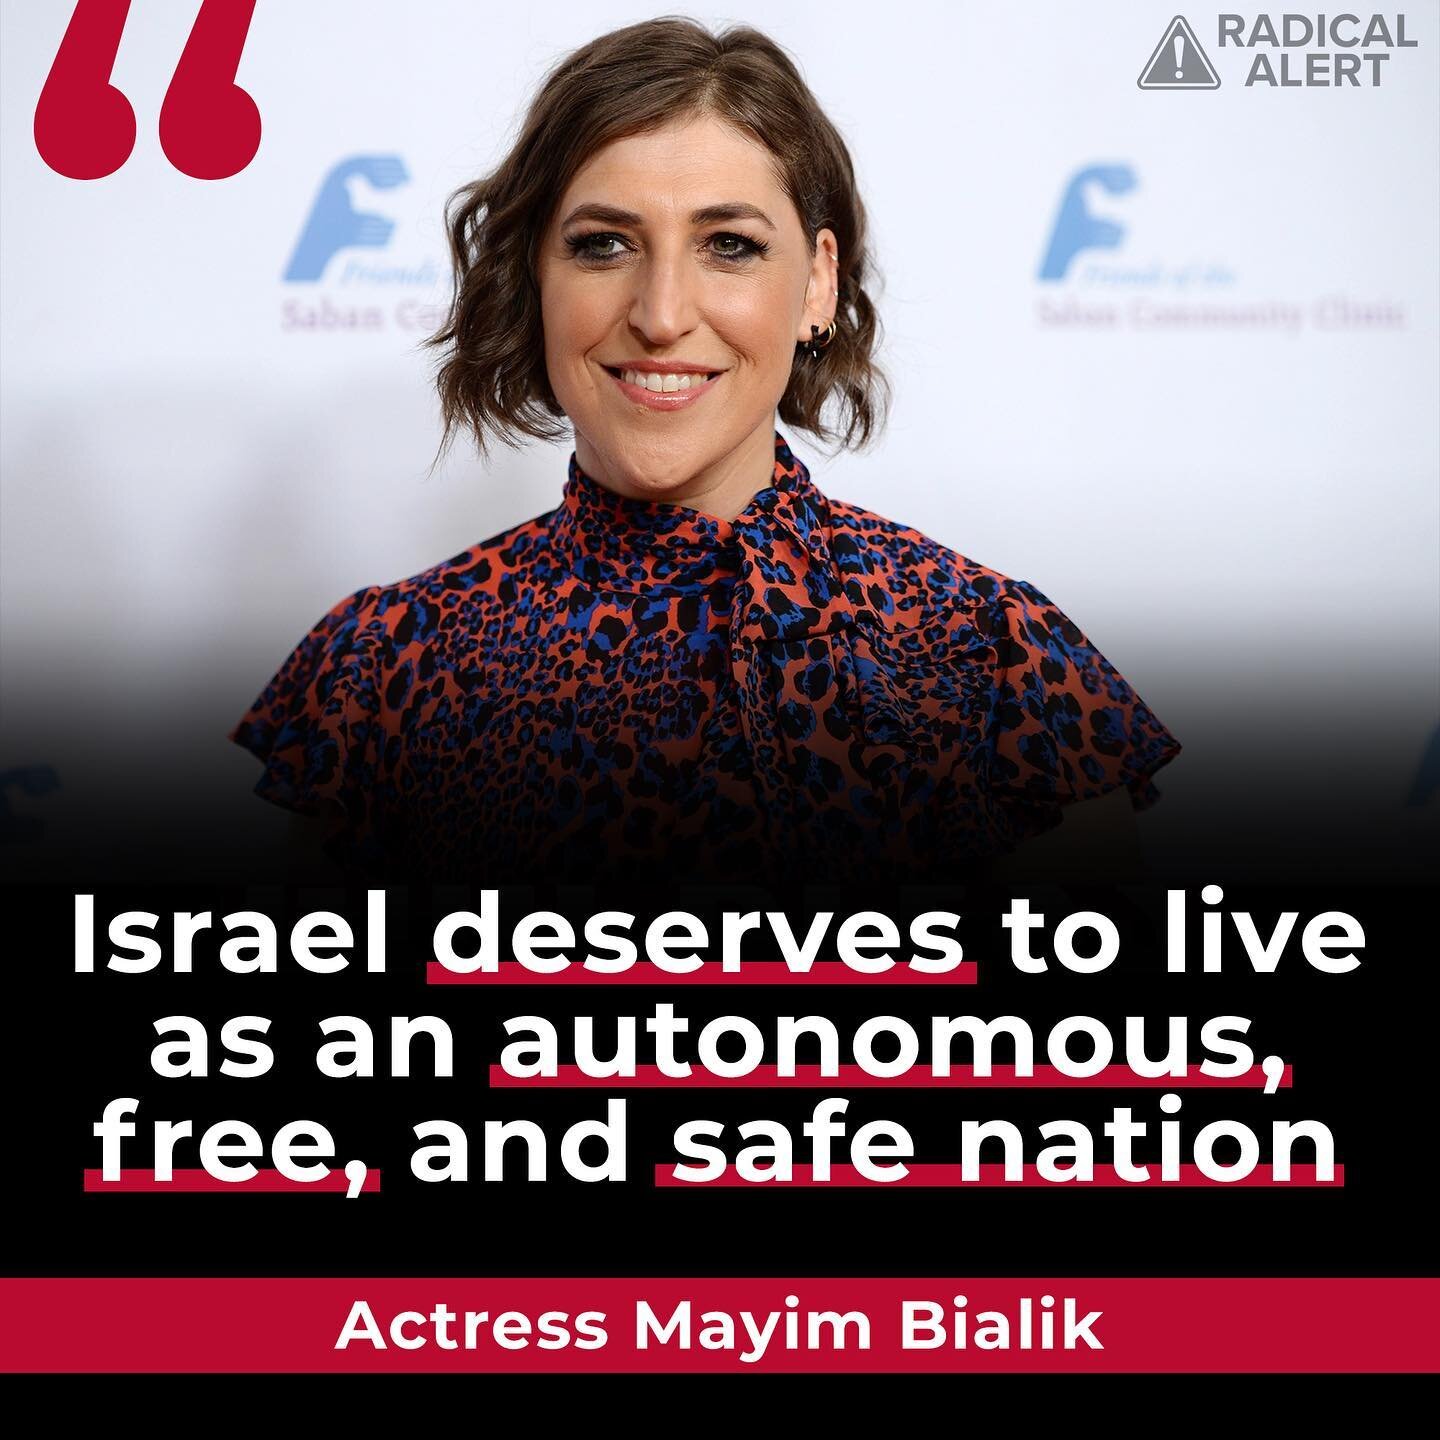 She&rsquo;s 100% correct!

#standwithisrael #israel